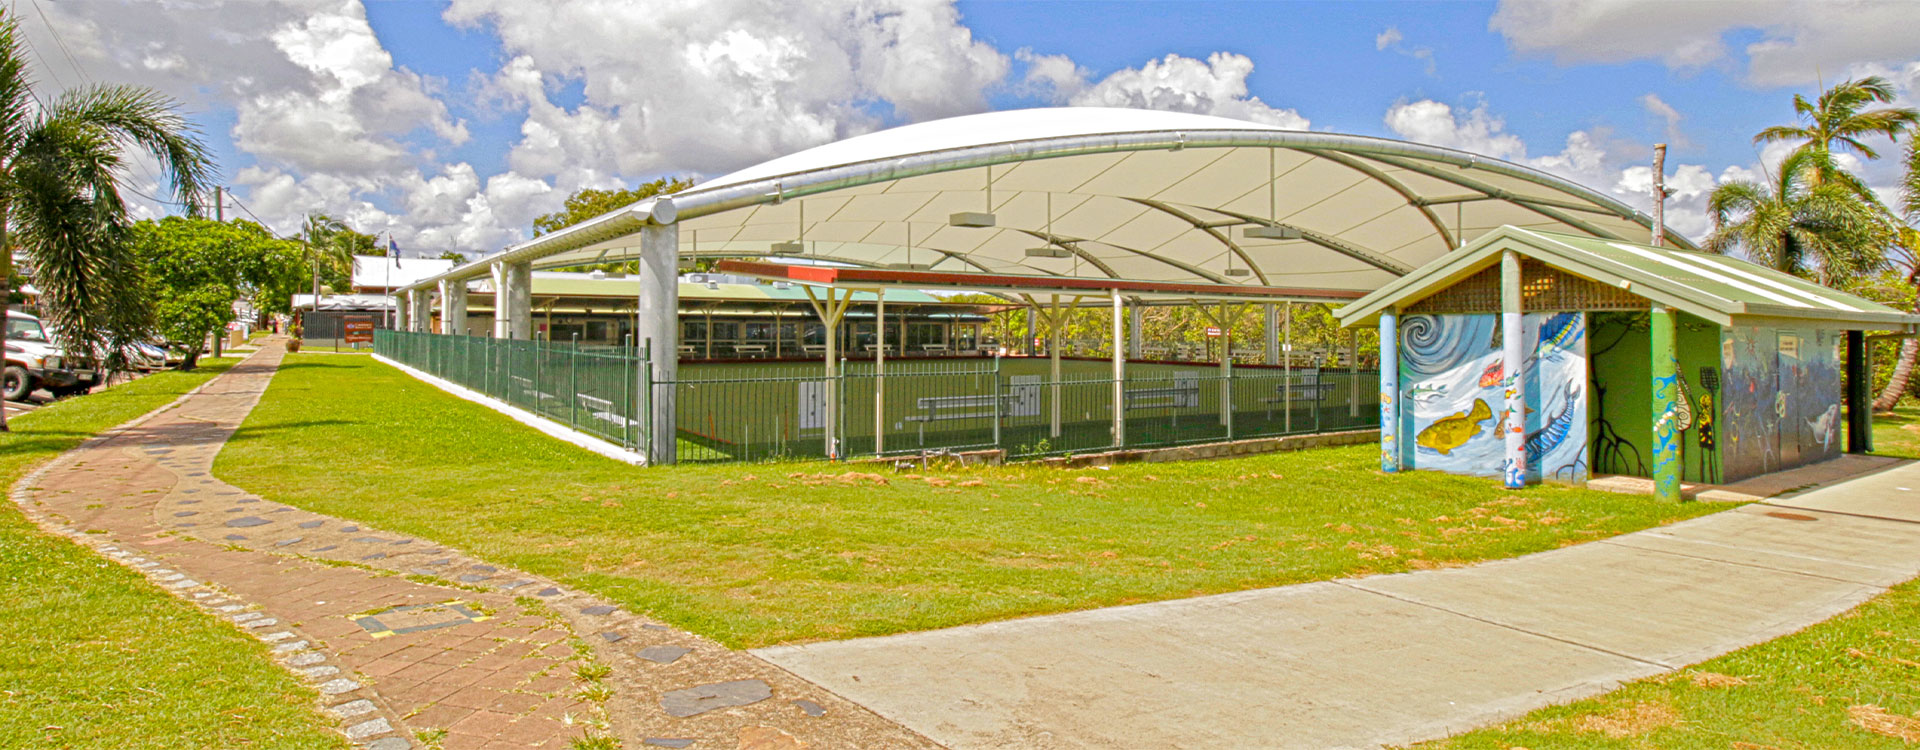 Cooktown Bowls Club Canopy